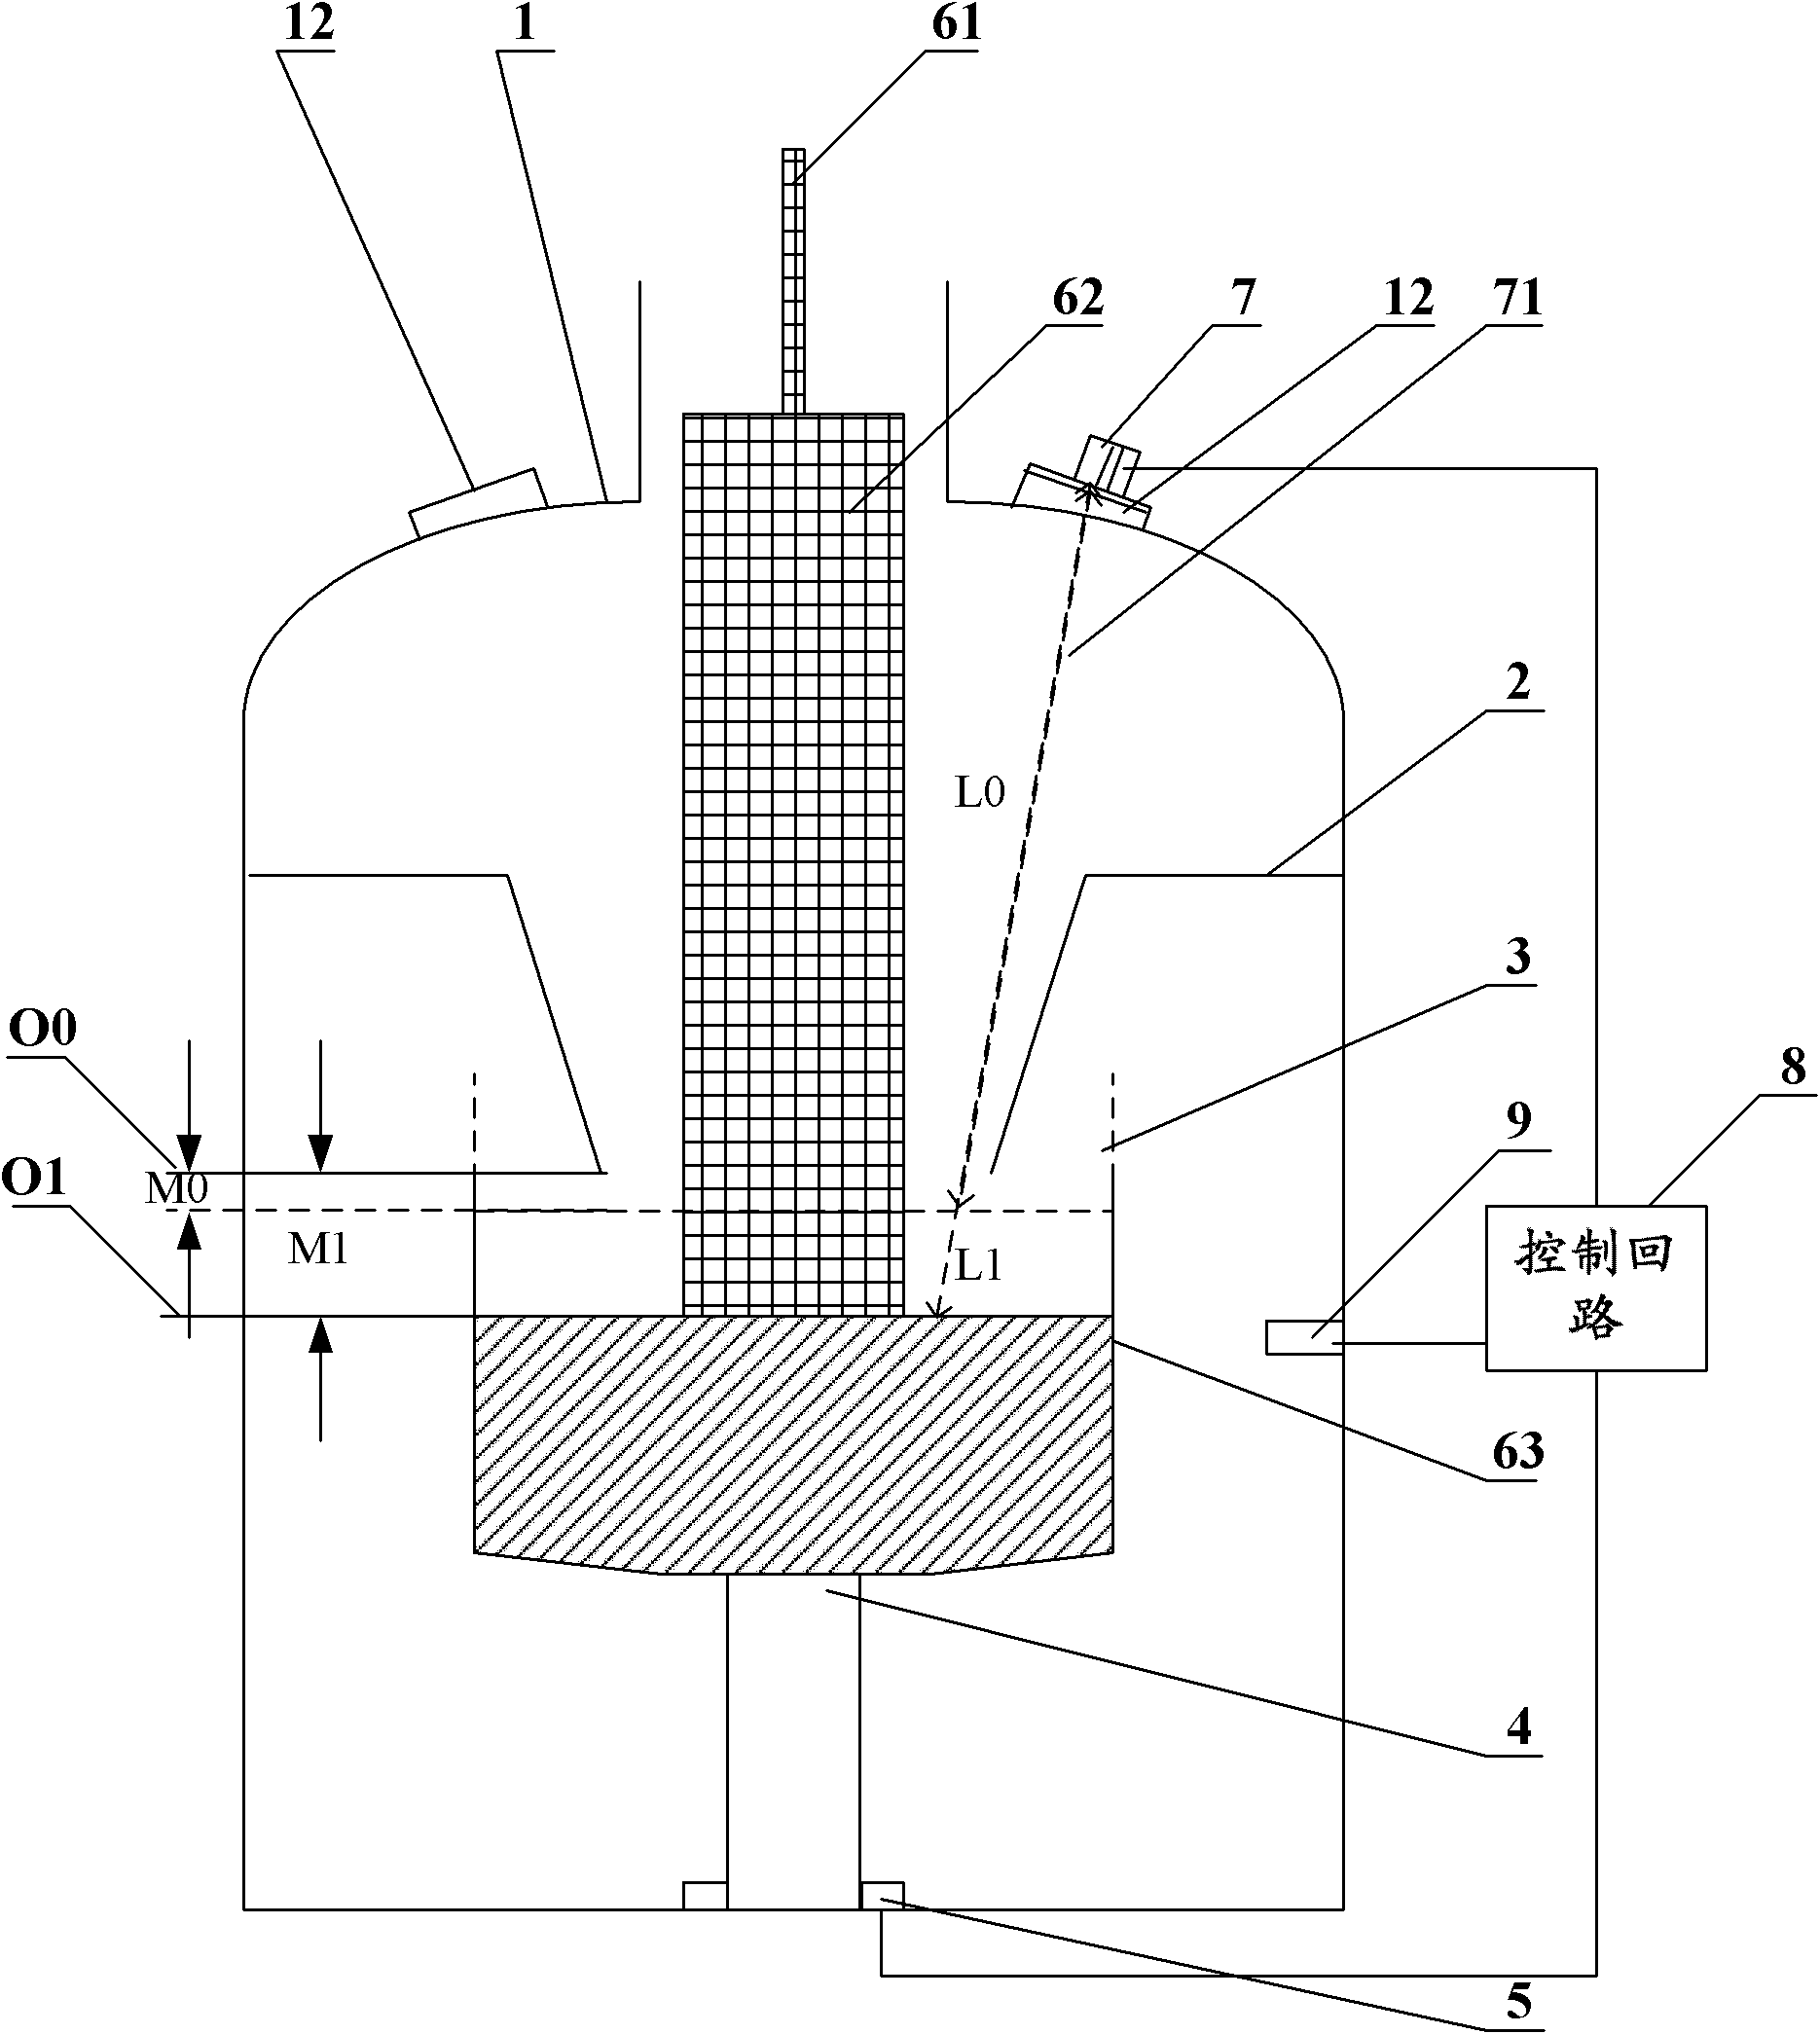 Position control method and device for silicone liquid level of czochralski crystal grower